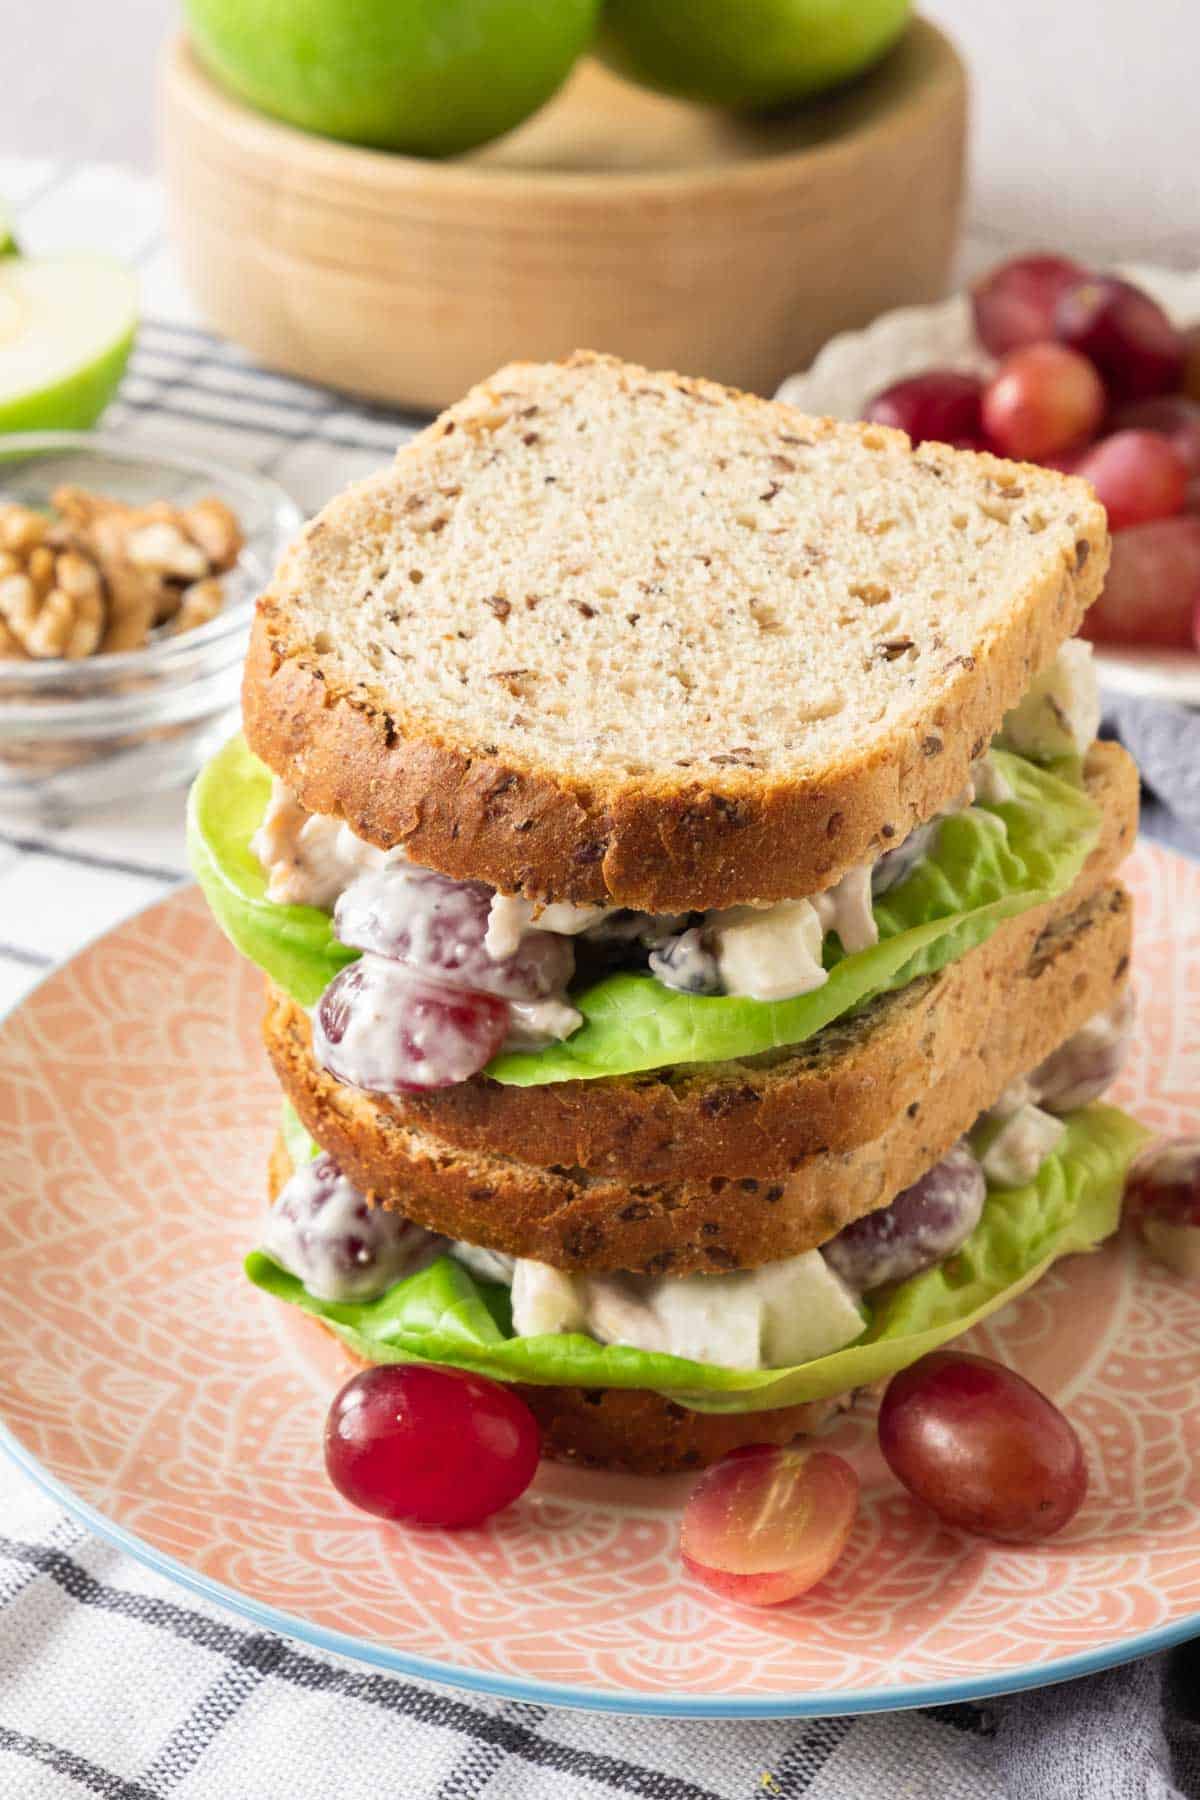 A sandwich with lettuce, grapes and grapes on a plate.